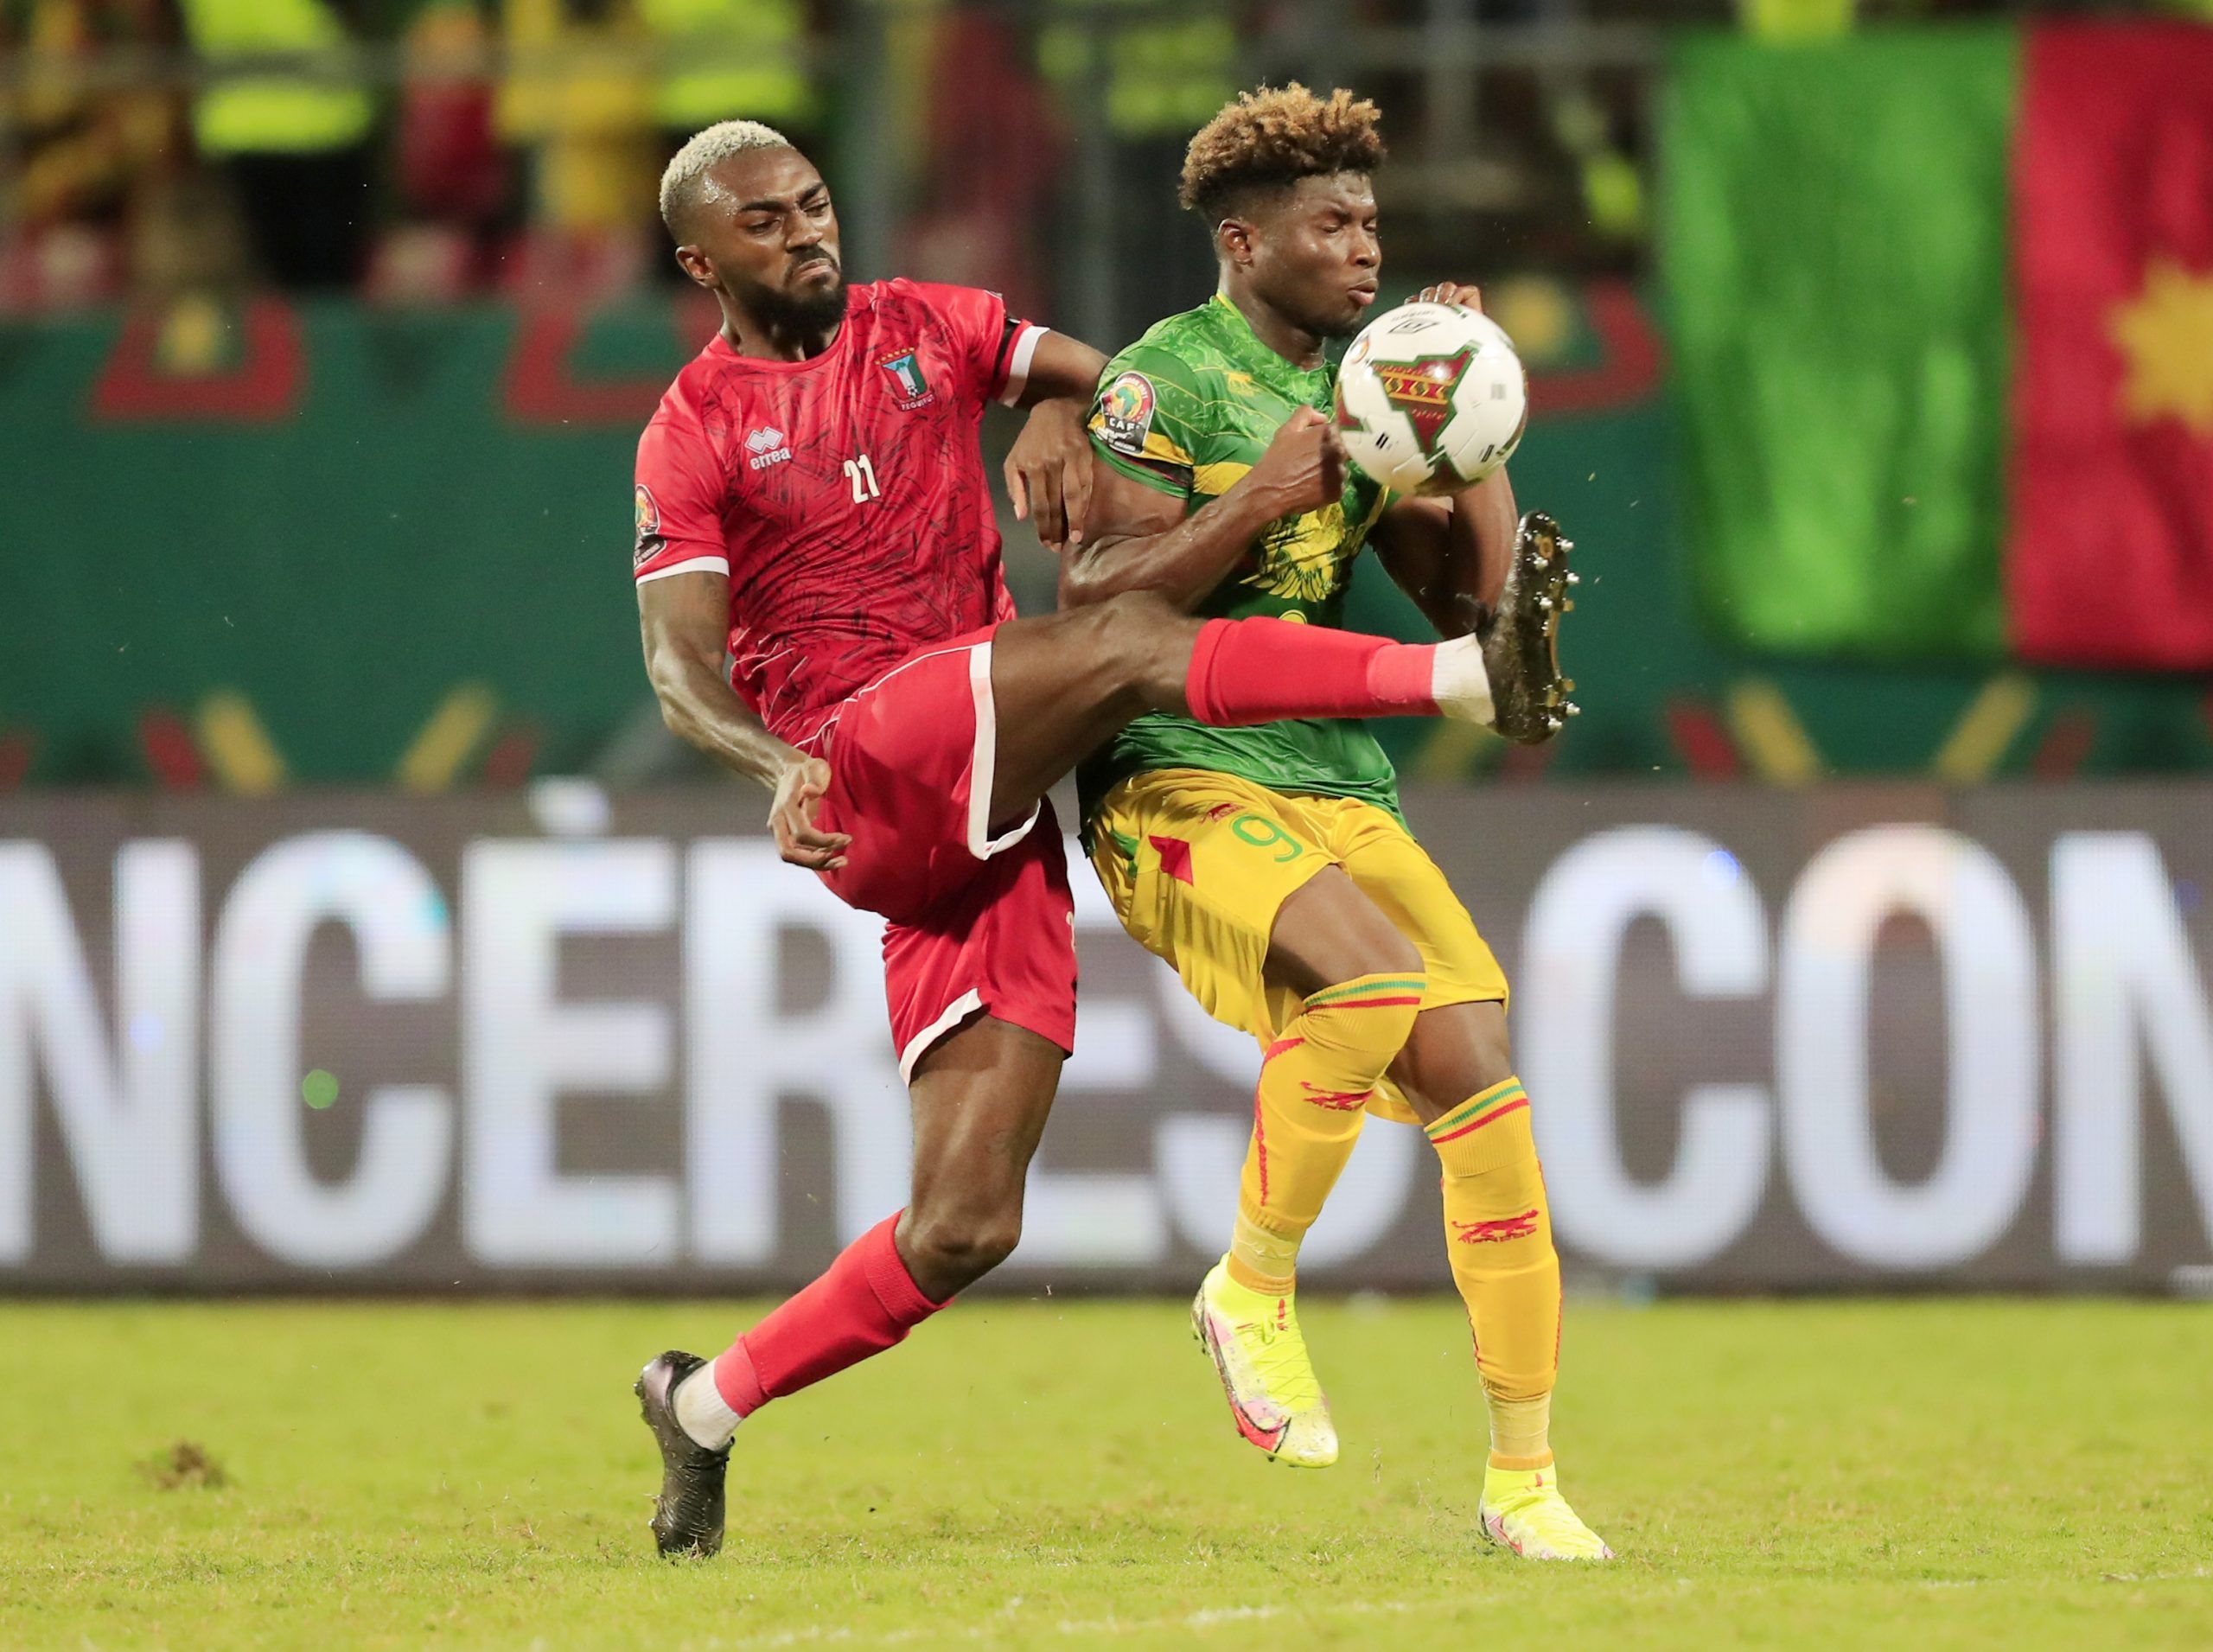 Soccer Football - Africa Cup of Nations - Round of 16 - Mali v Equatorial Guinea - Limbe Omnisport Stadium, Limbe, Cameroon - January 26, 2022 Equatorial Guinea's Esteban Obiang in action with Mali's El Bilal Toure REUTERS/Thaier Al-Sudani